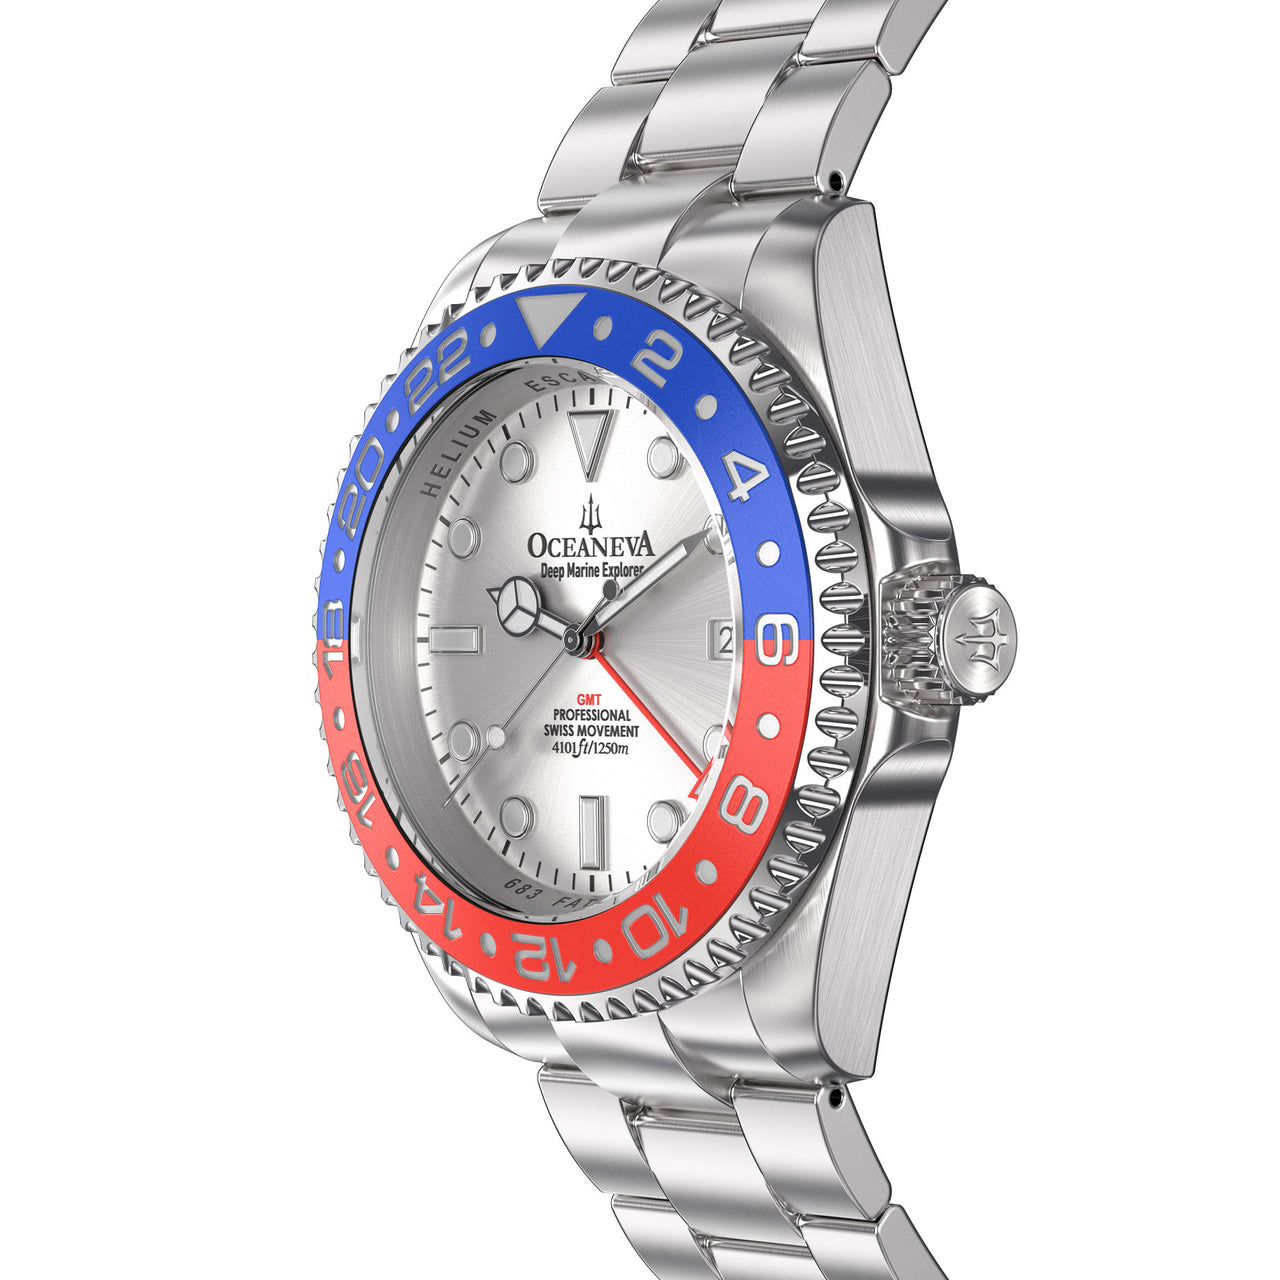 Oceaneva 1250M GMT Dive Watch Silver Blue And Red Side View Crown